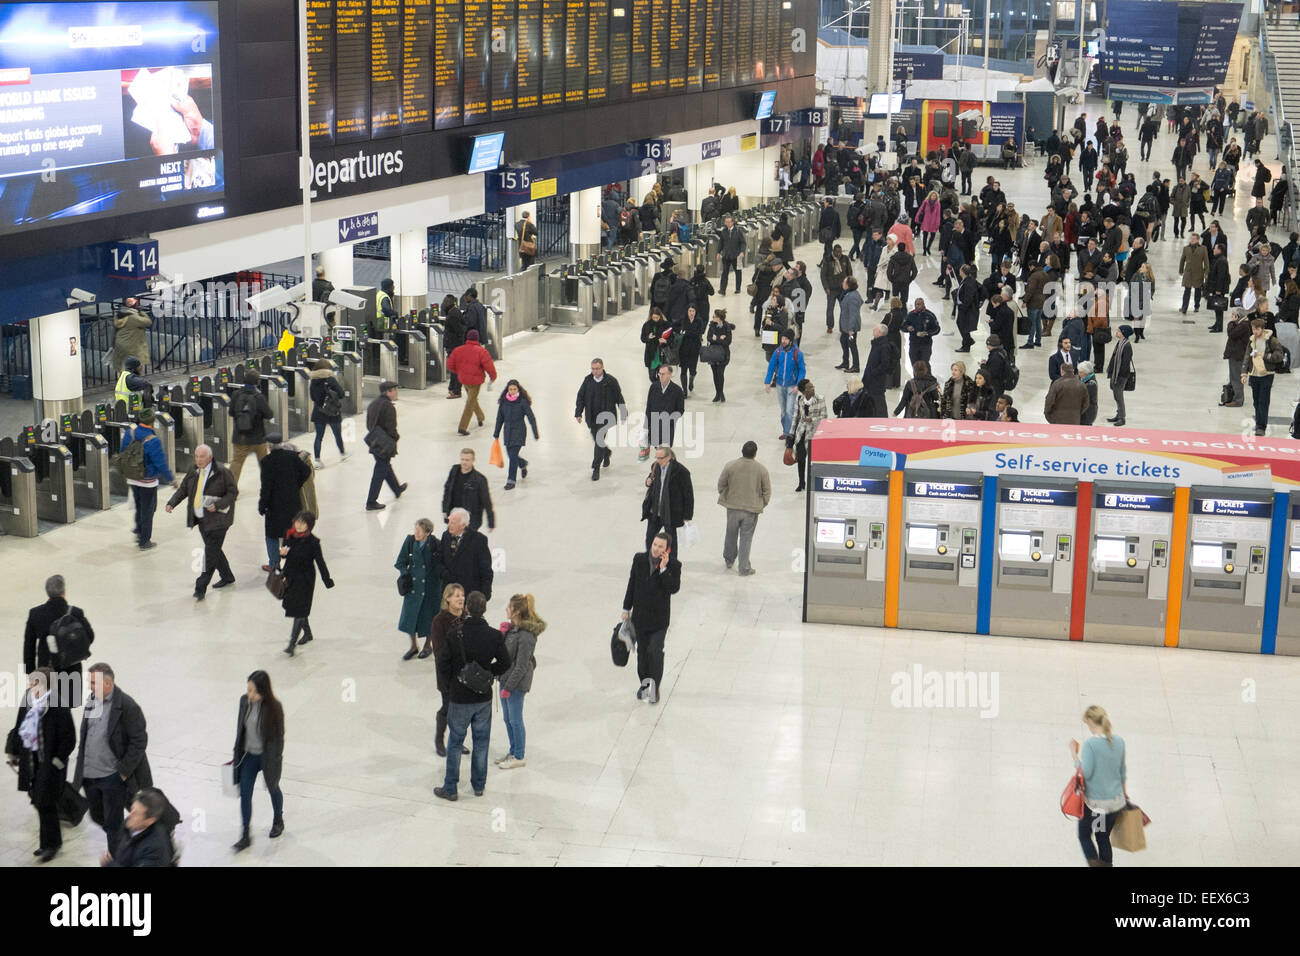 London waterloo railway station and its busy commuters on the concourse waiting for trains,England,UK Stock Photo